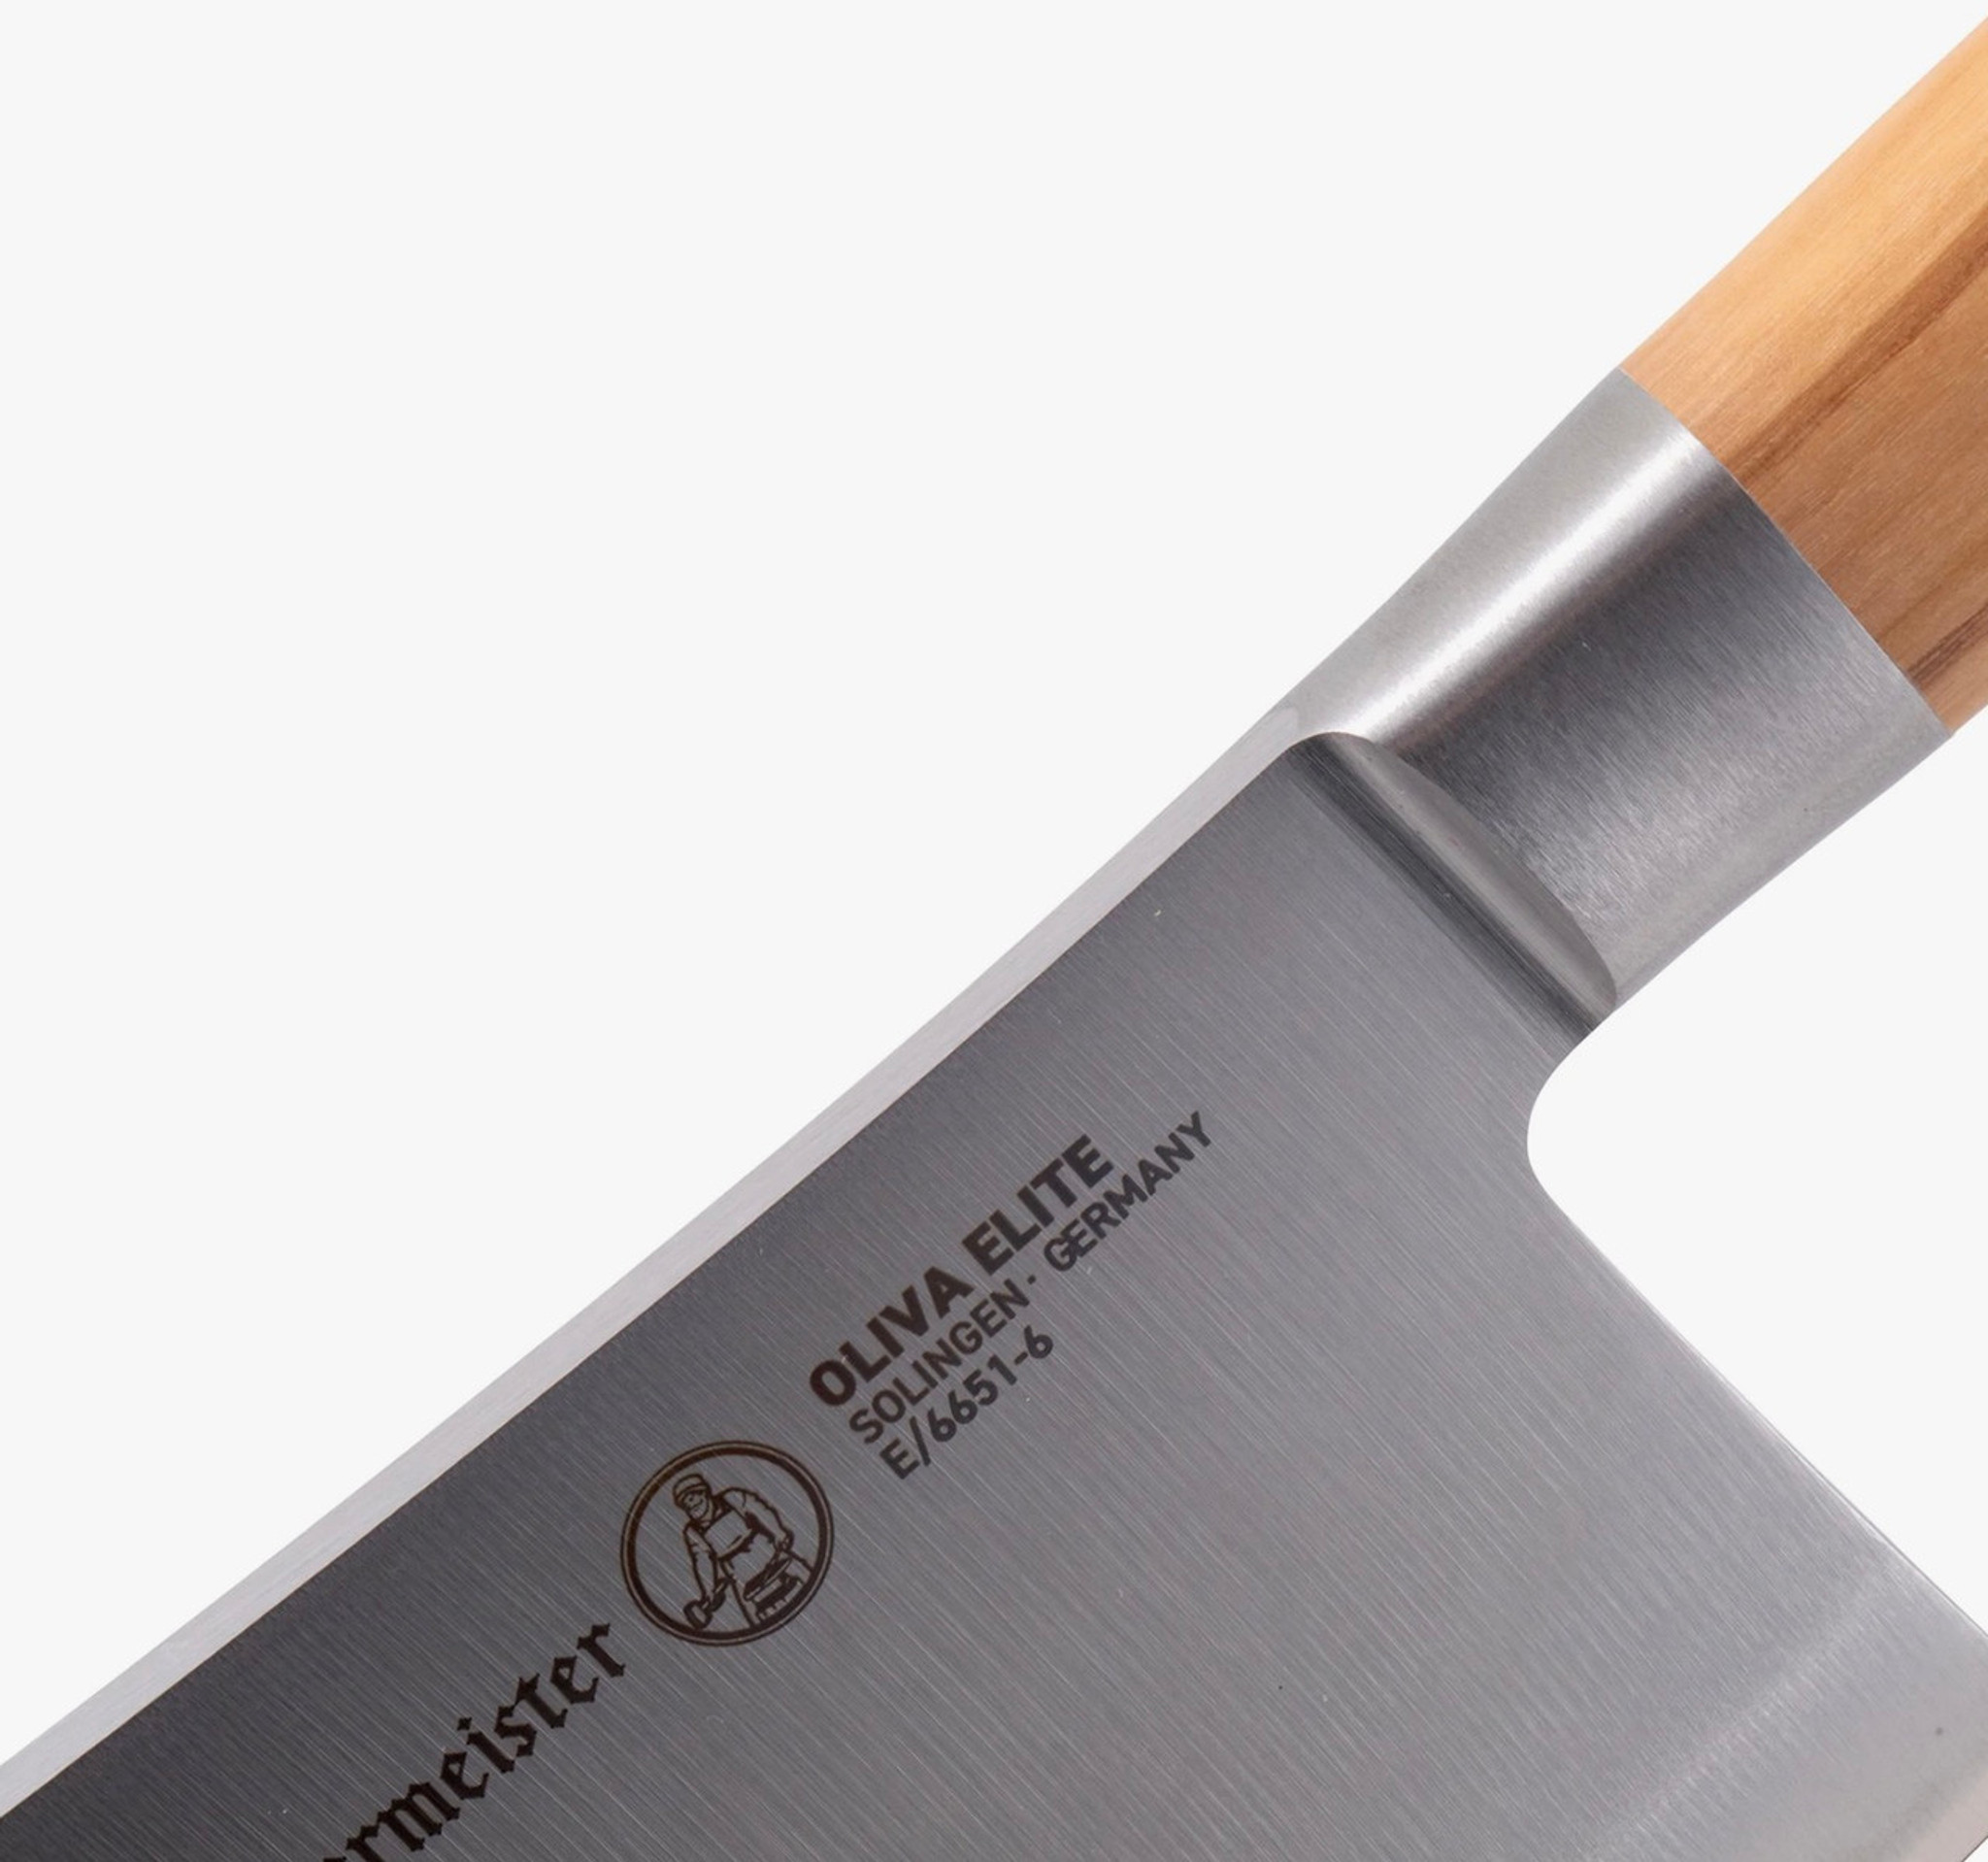 https://cdn11.bigcommerce.com/s-btwlt97xs5/images/stencil/2048x2048/products/928/10564/messermeister-oliva-elite-6-in-meat-cleaver-with-olive-wood-handle__46102.1701255220.jpg?c=1